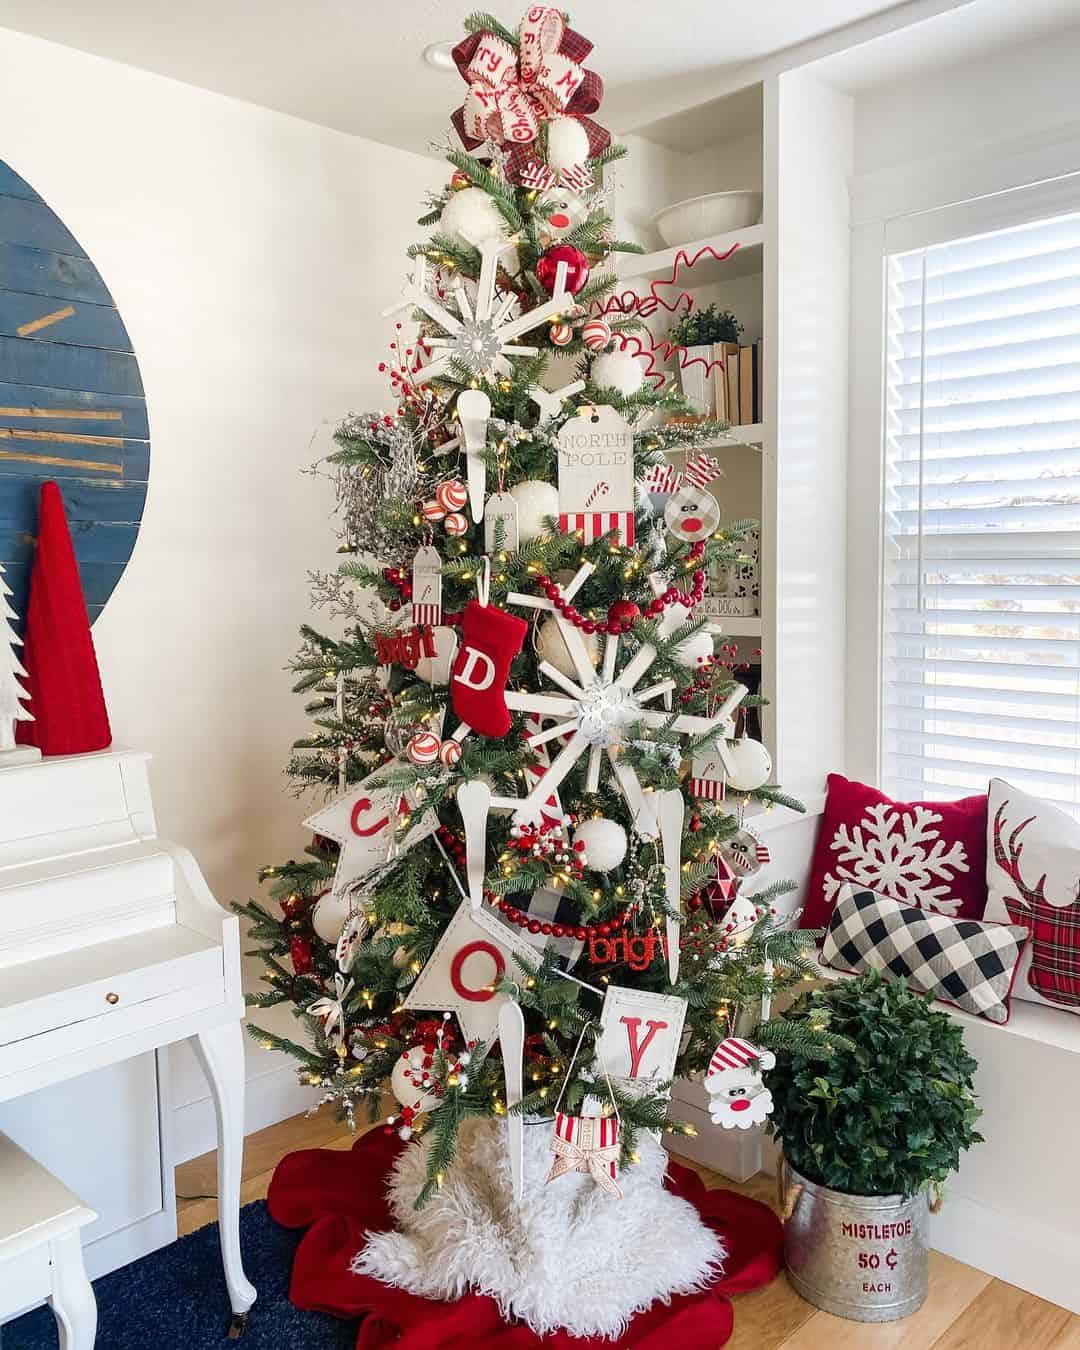 Decorating a Flocked Christmas Tree in Red and White and Creating